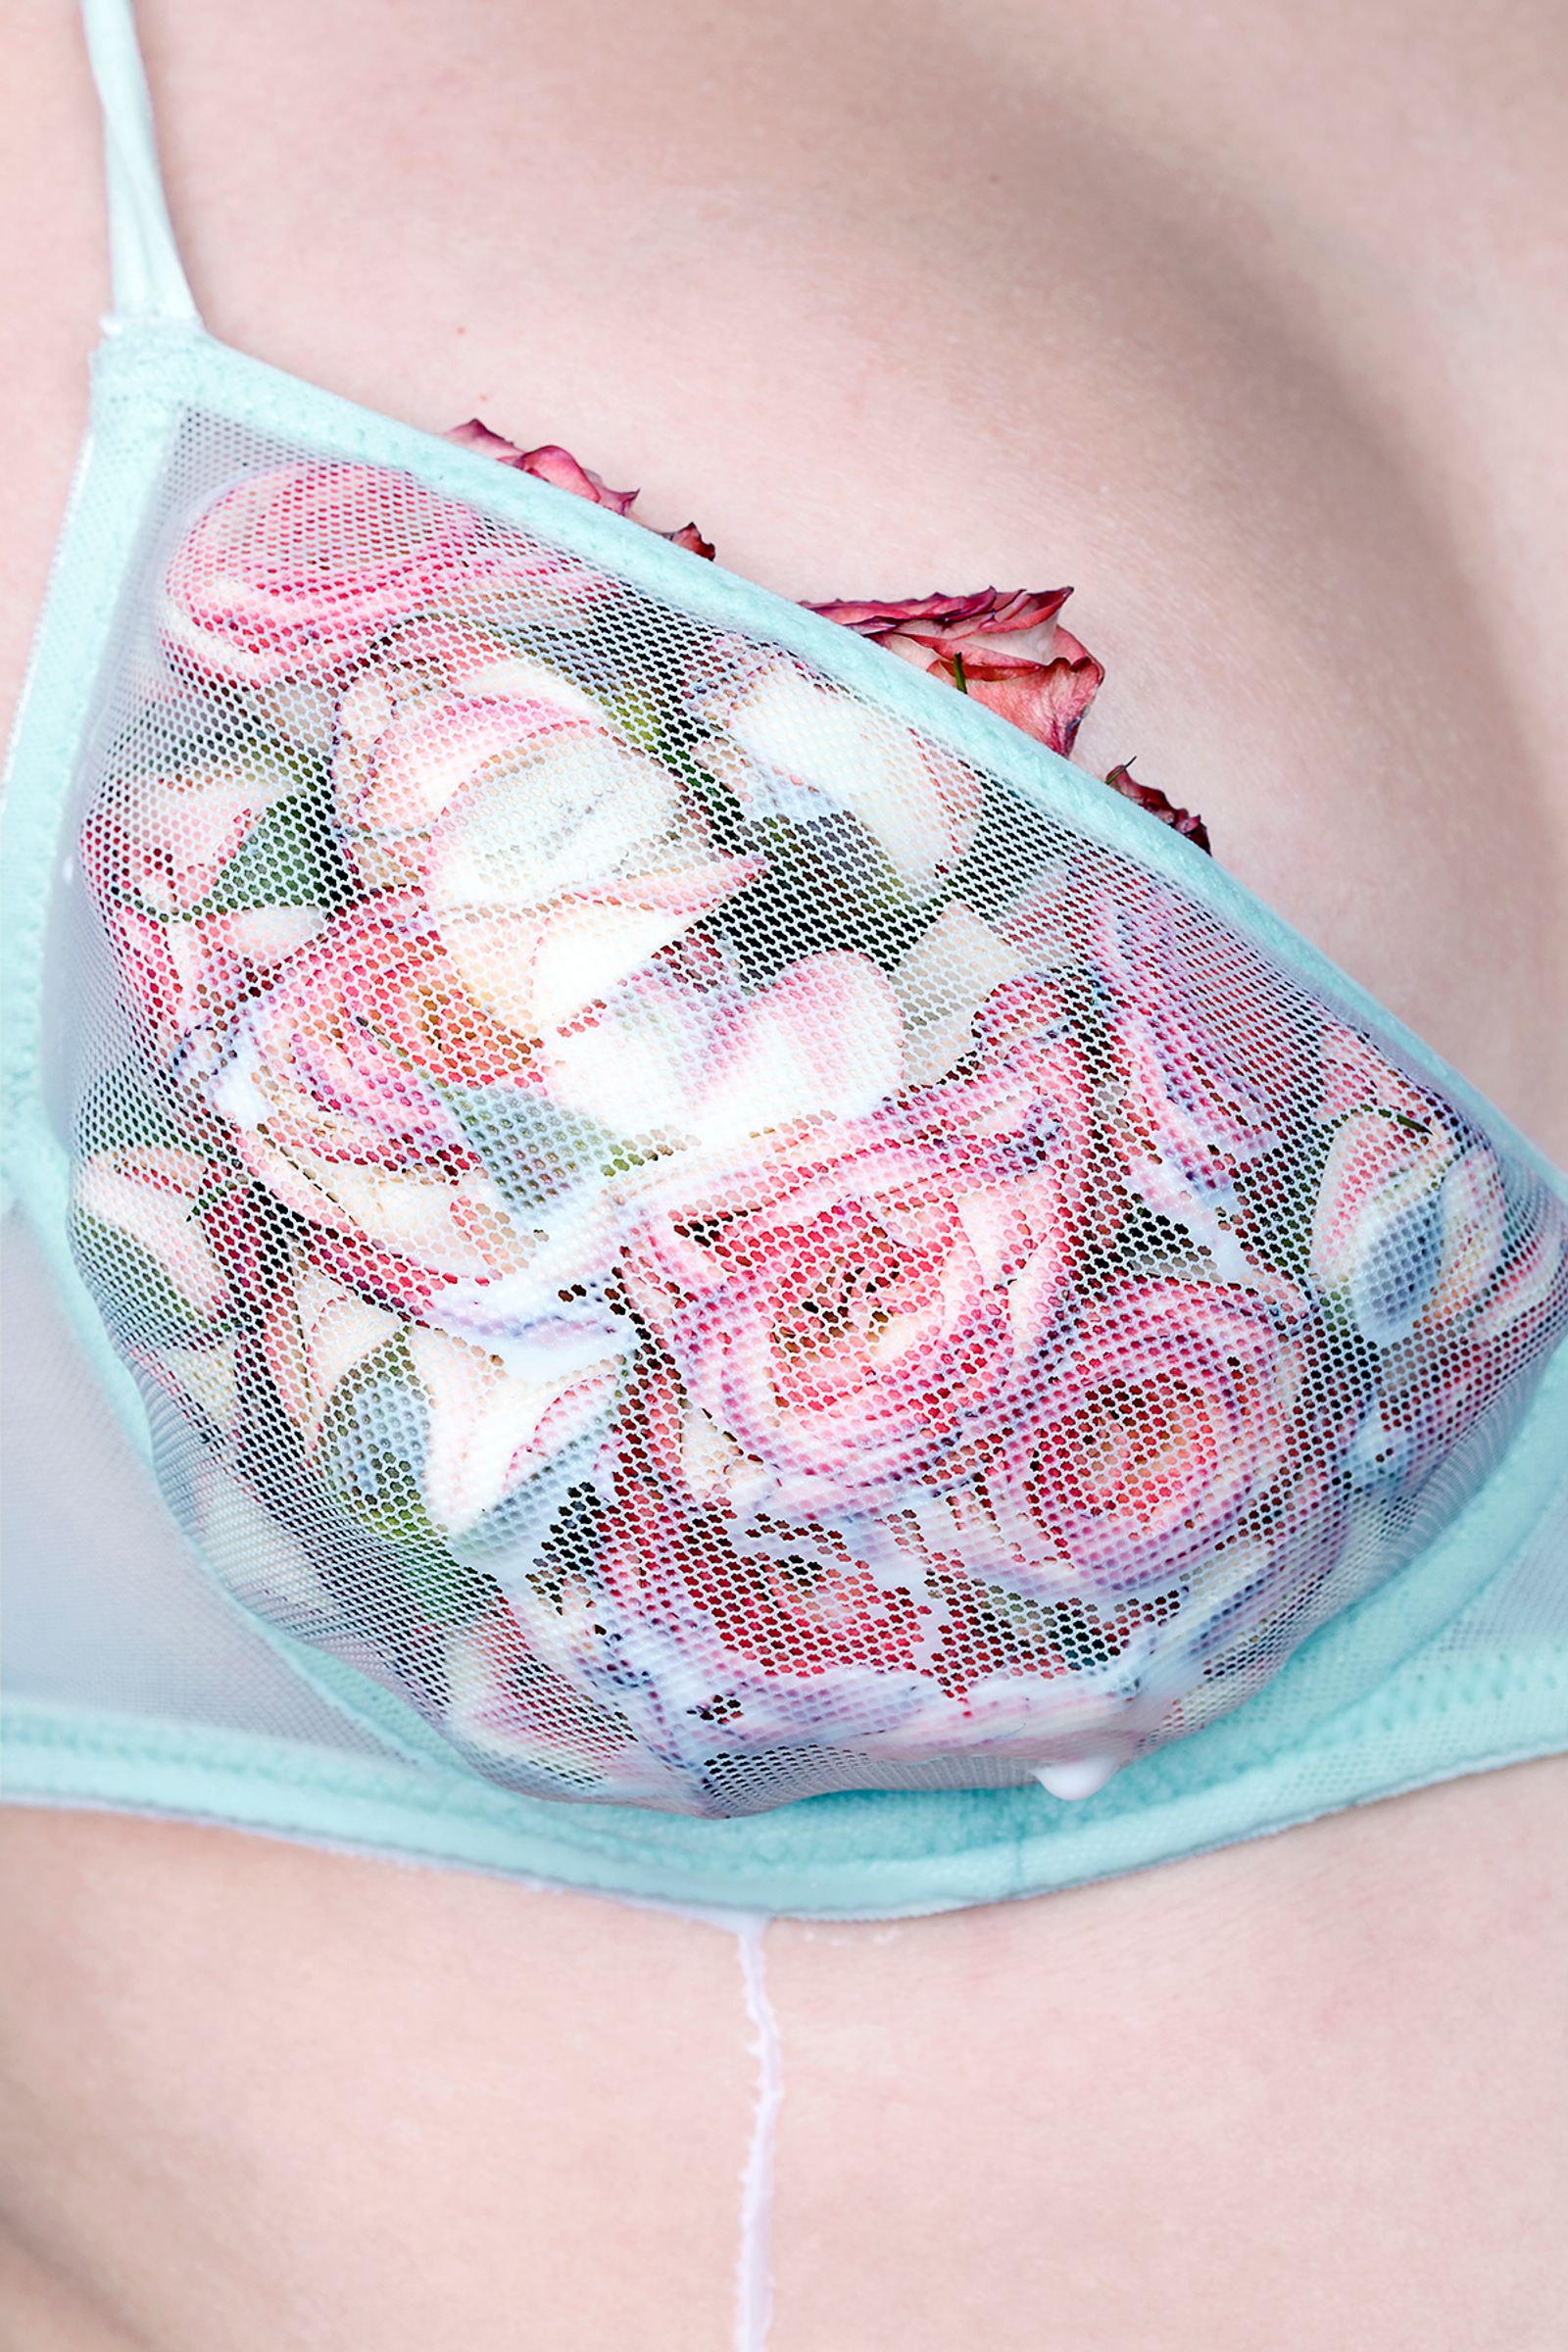 © Ana Espinal - Juicy Roses, Archival inkjet print, 20 x 30 in. or smaller size.